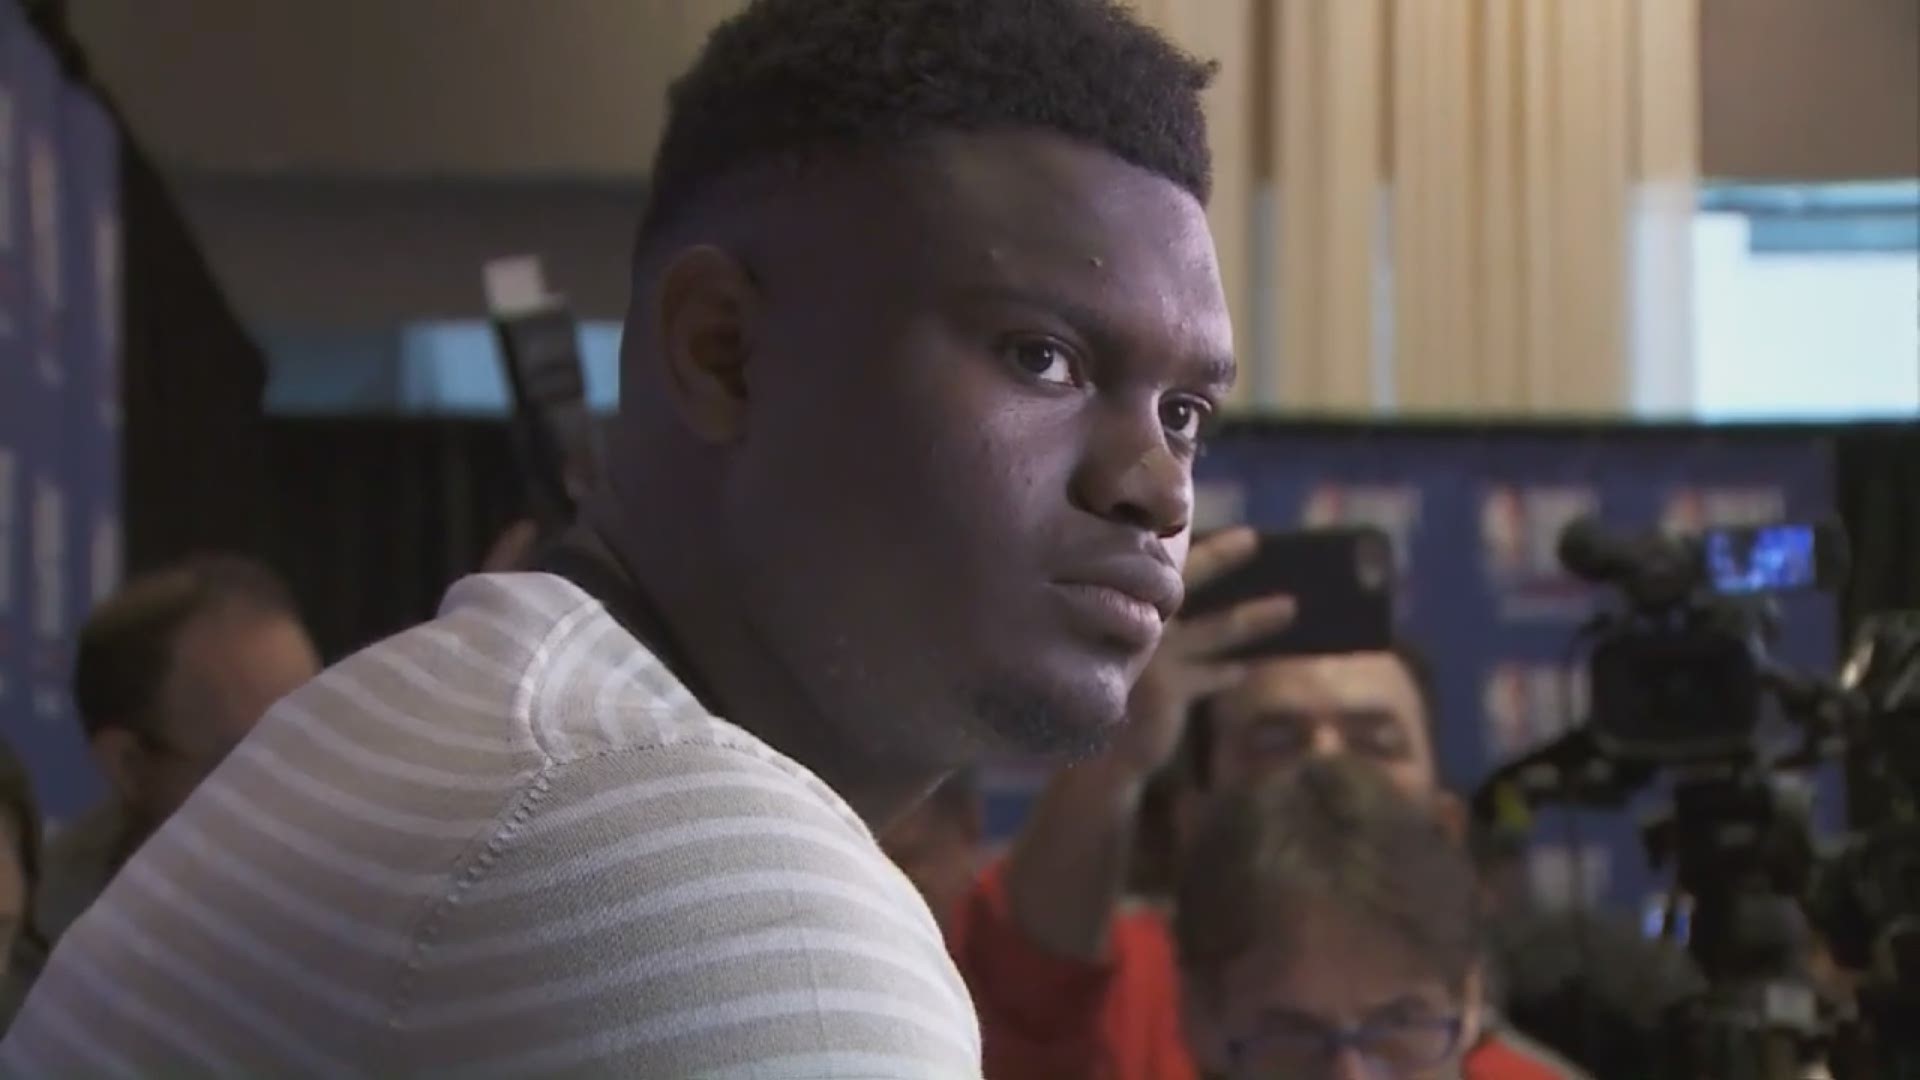 Zion Williamson, the projected first pick in the 2019 NBA Draft, talked to the media from New York about the New Orleans Pelicans, his love for basketball and Duke.